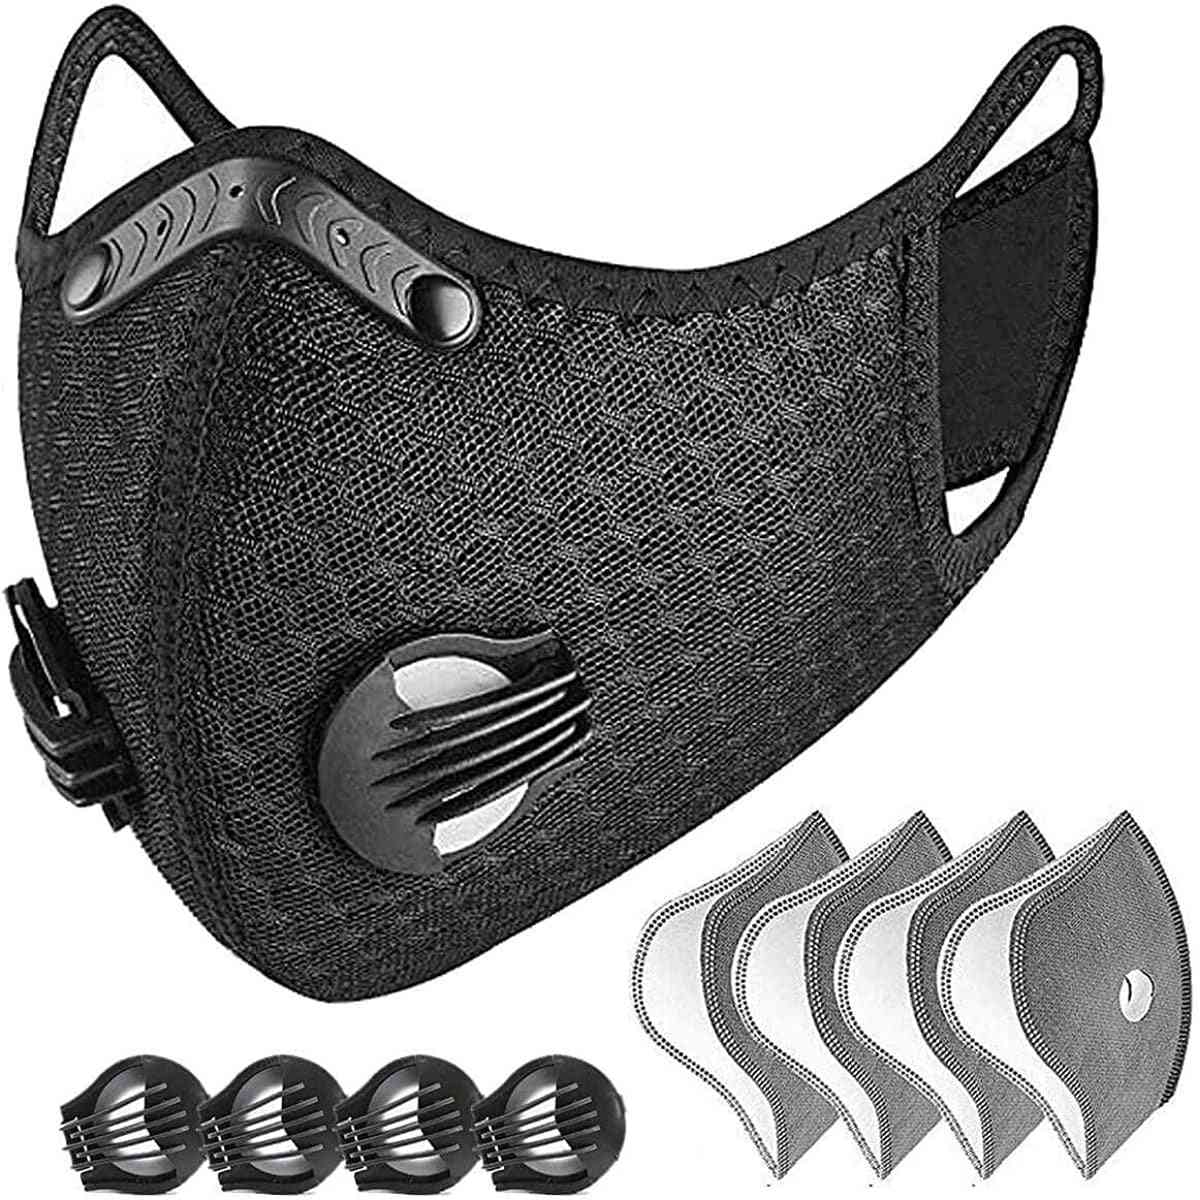 Reusable, Dustproof Respirator Face Mask With 4 Filters And Exhaust Valves